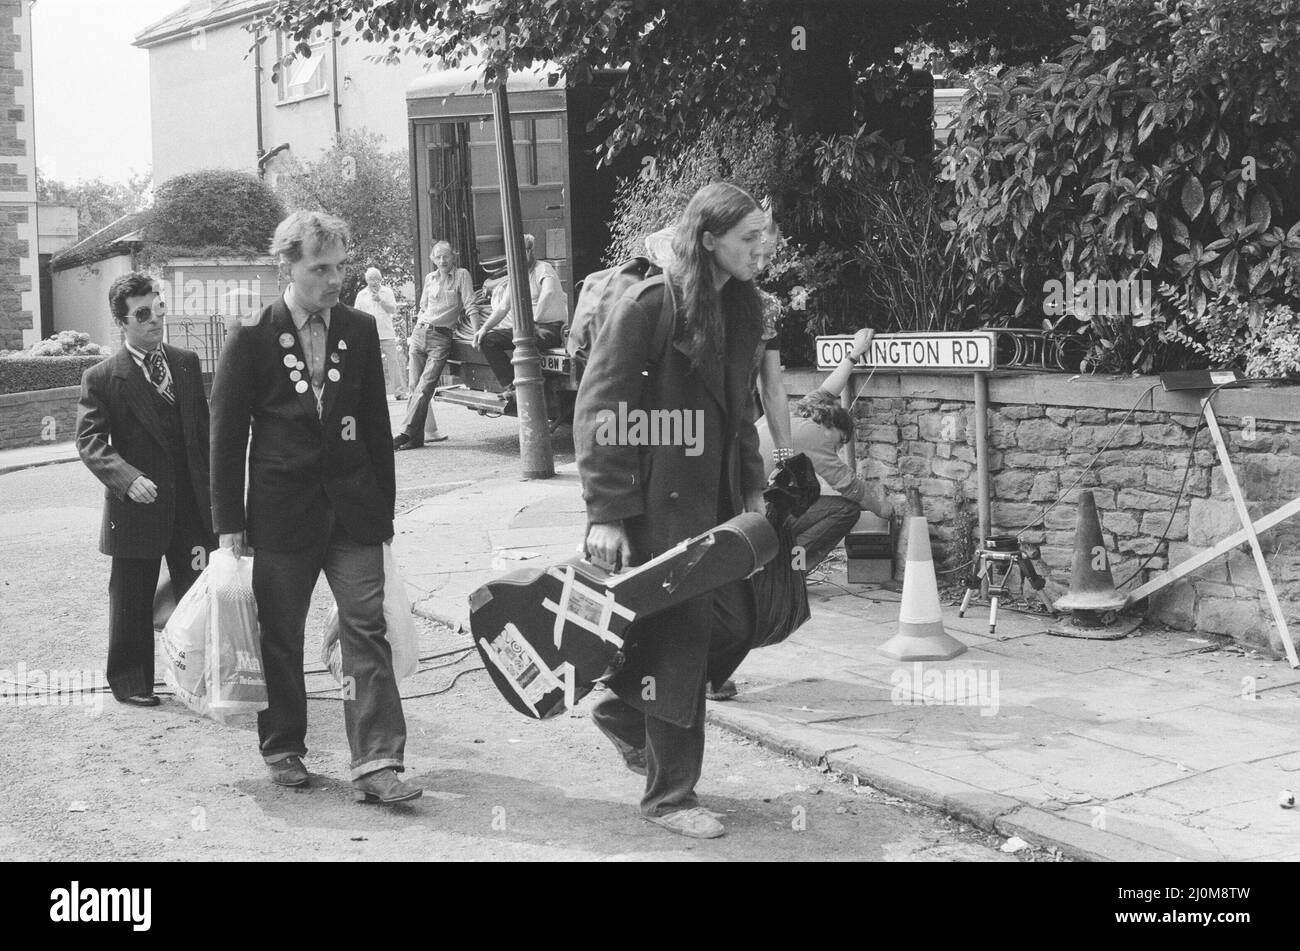 The cast of the Young Ones seen here filming on location at Codrington Road, Bristol. Right to Left  Nigel Planer as Neil, Rik Mayall as Rick, Chris Ryan as Mike. August 1982. Stock Photo